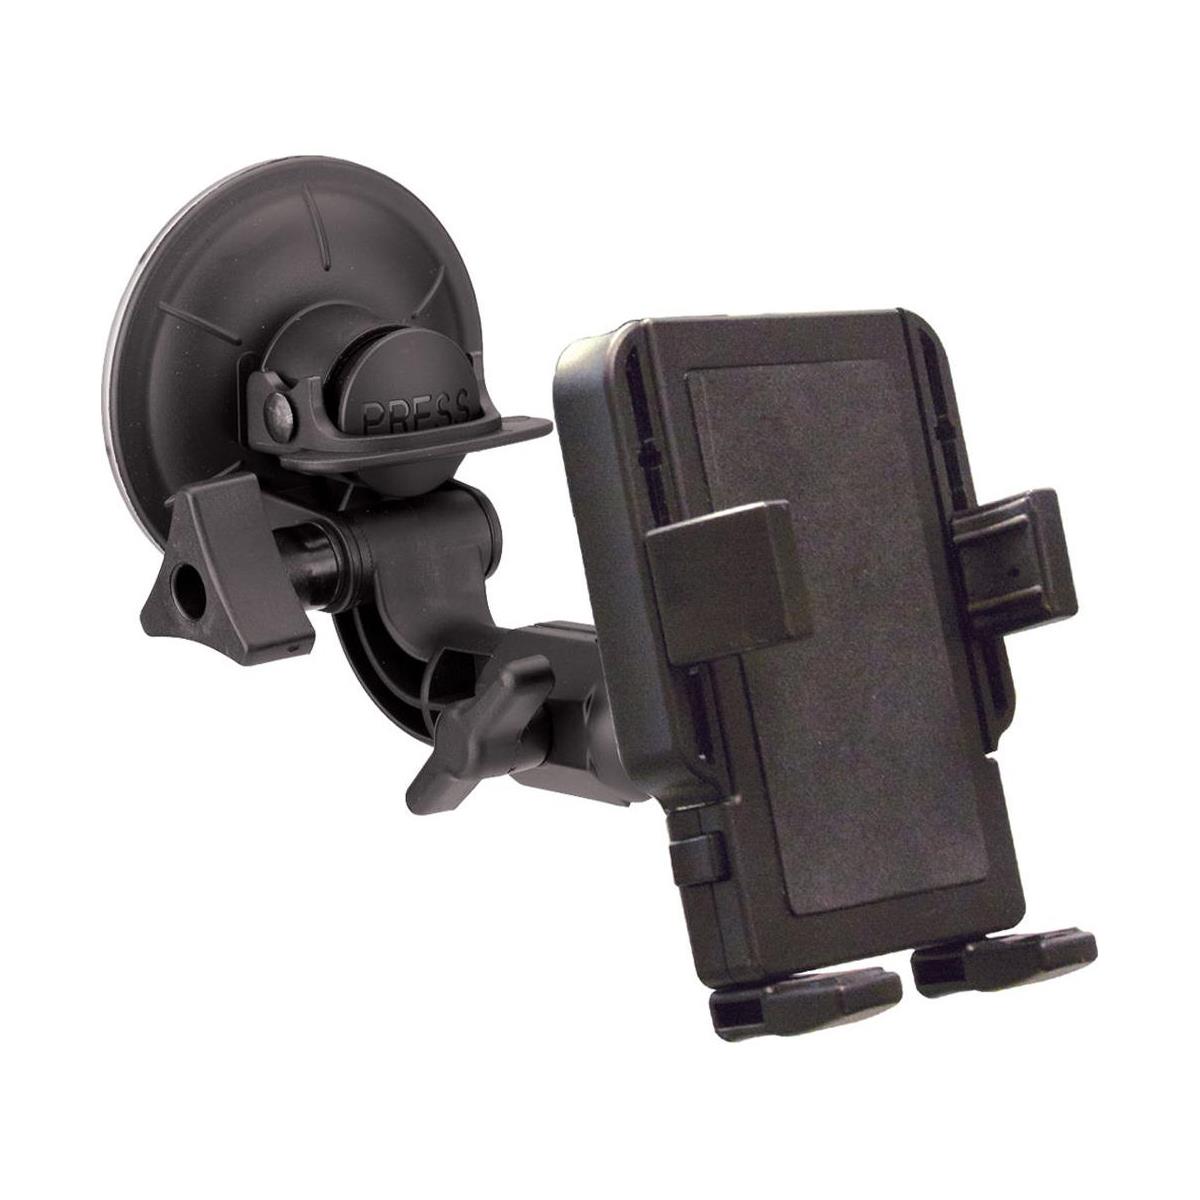 Image of PanaVise PortaGrip Universal Phone Holder with 809-AMP Suction Cup Mount